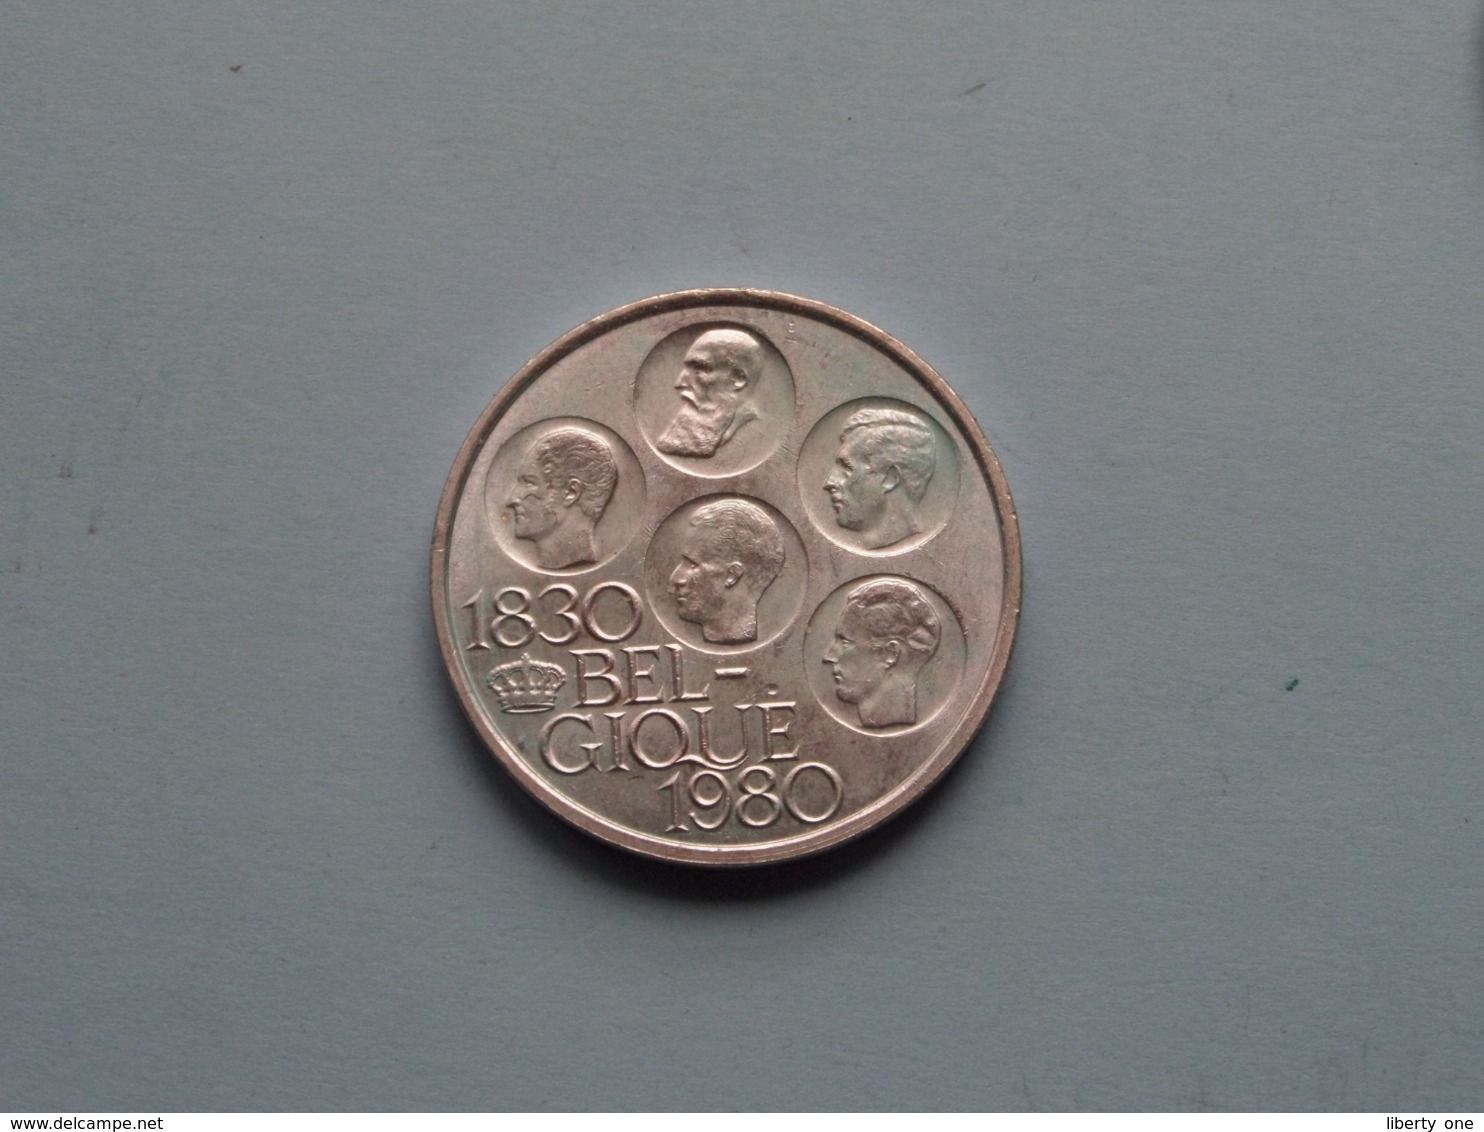 1980 FR - 500 FRANC - Morin 800 ( UNCLEANED COIN - For Grade, Please See Photo ) ! - 500 Frank